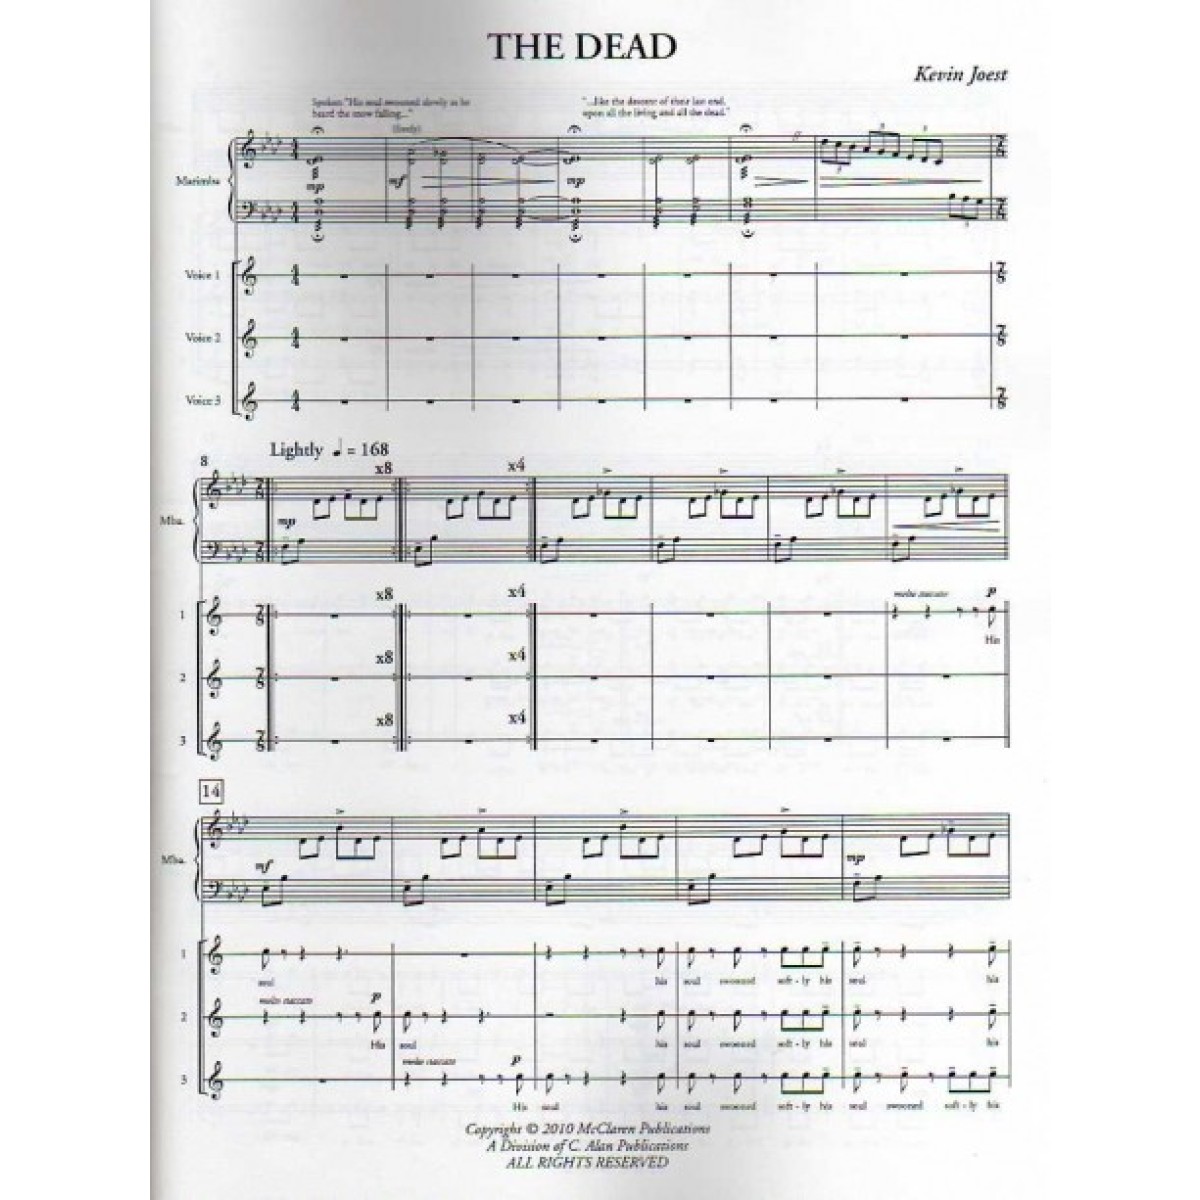 The Dead by Kevin Joest